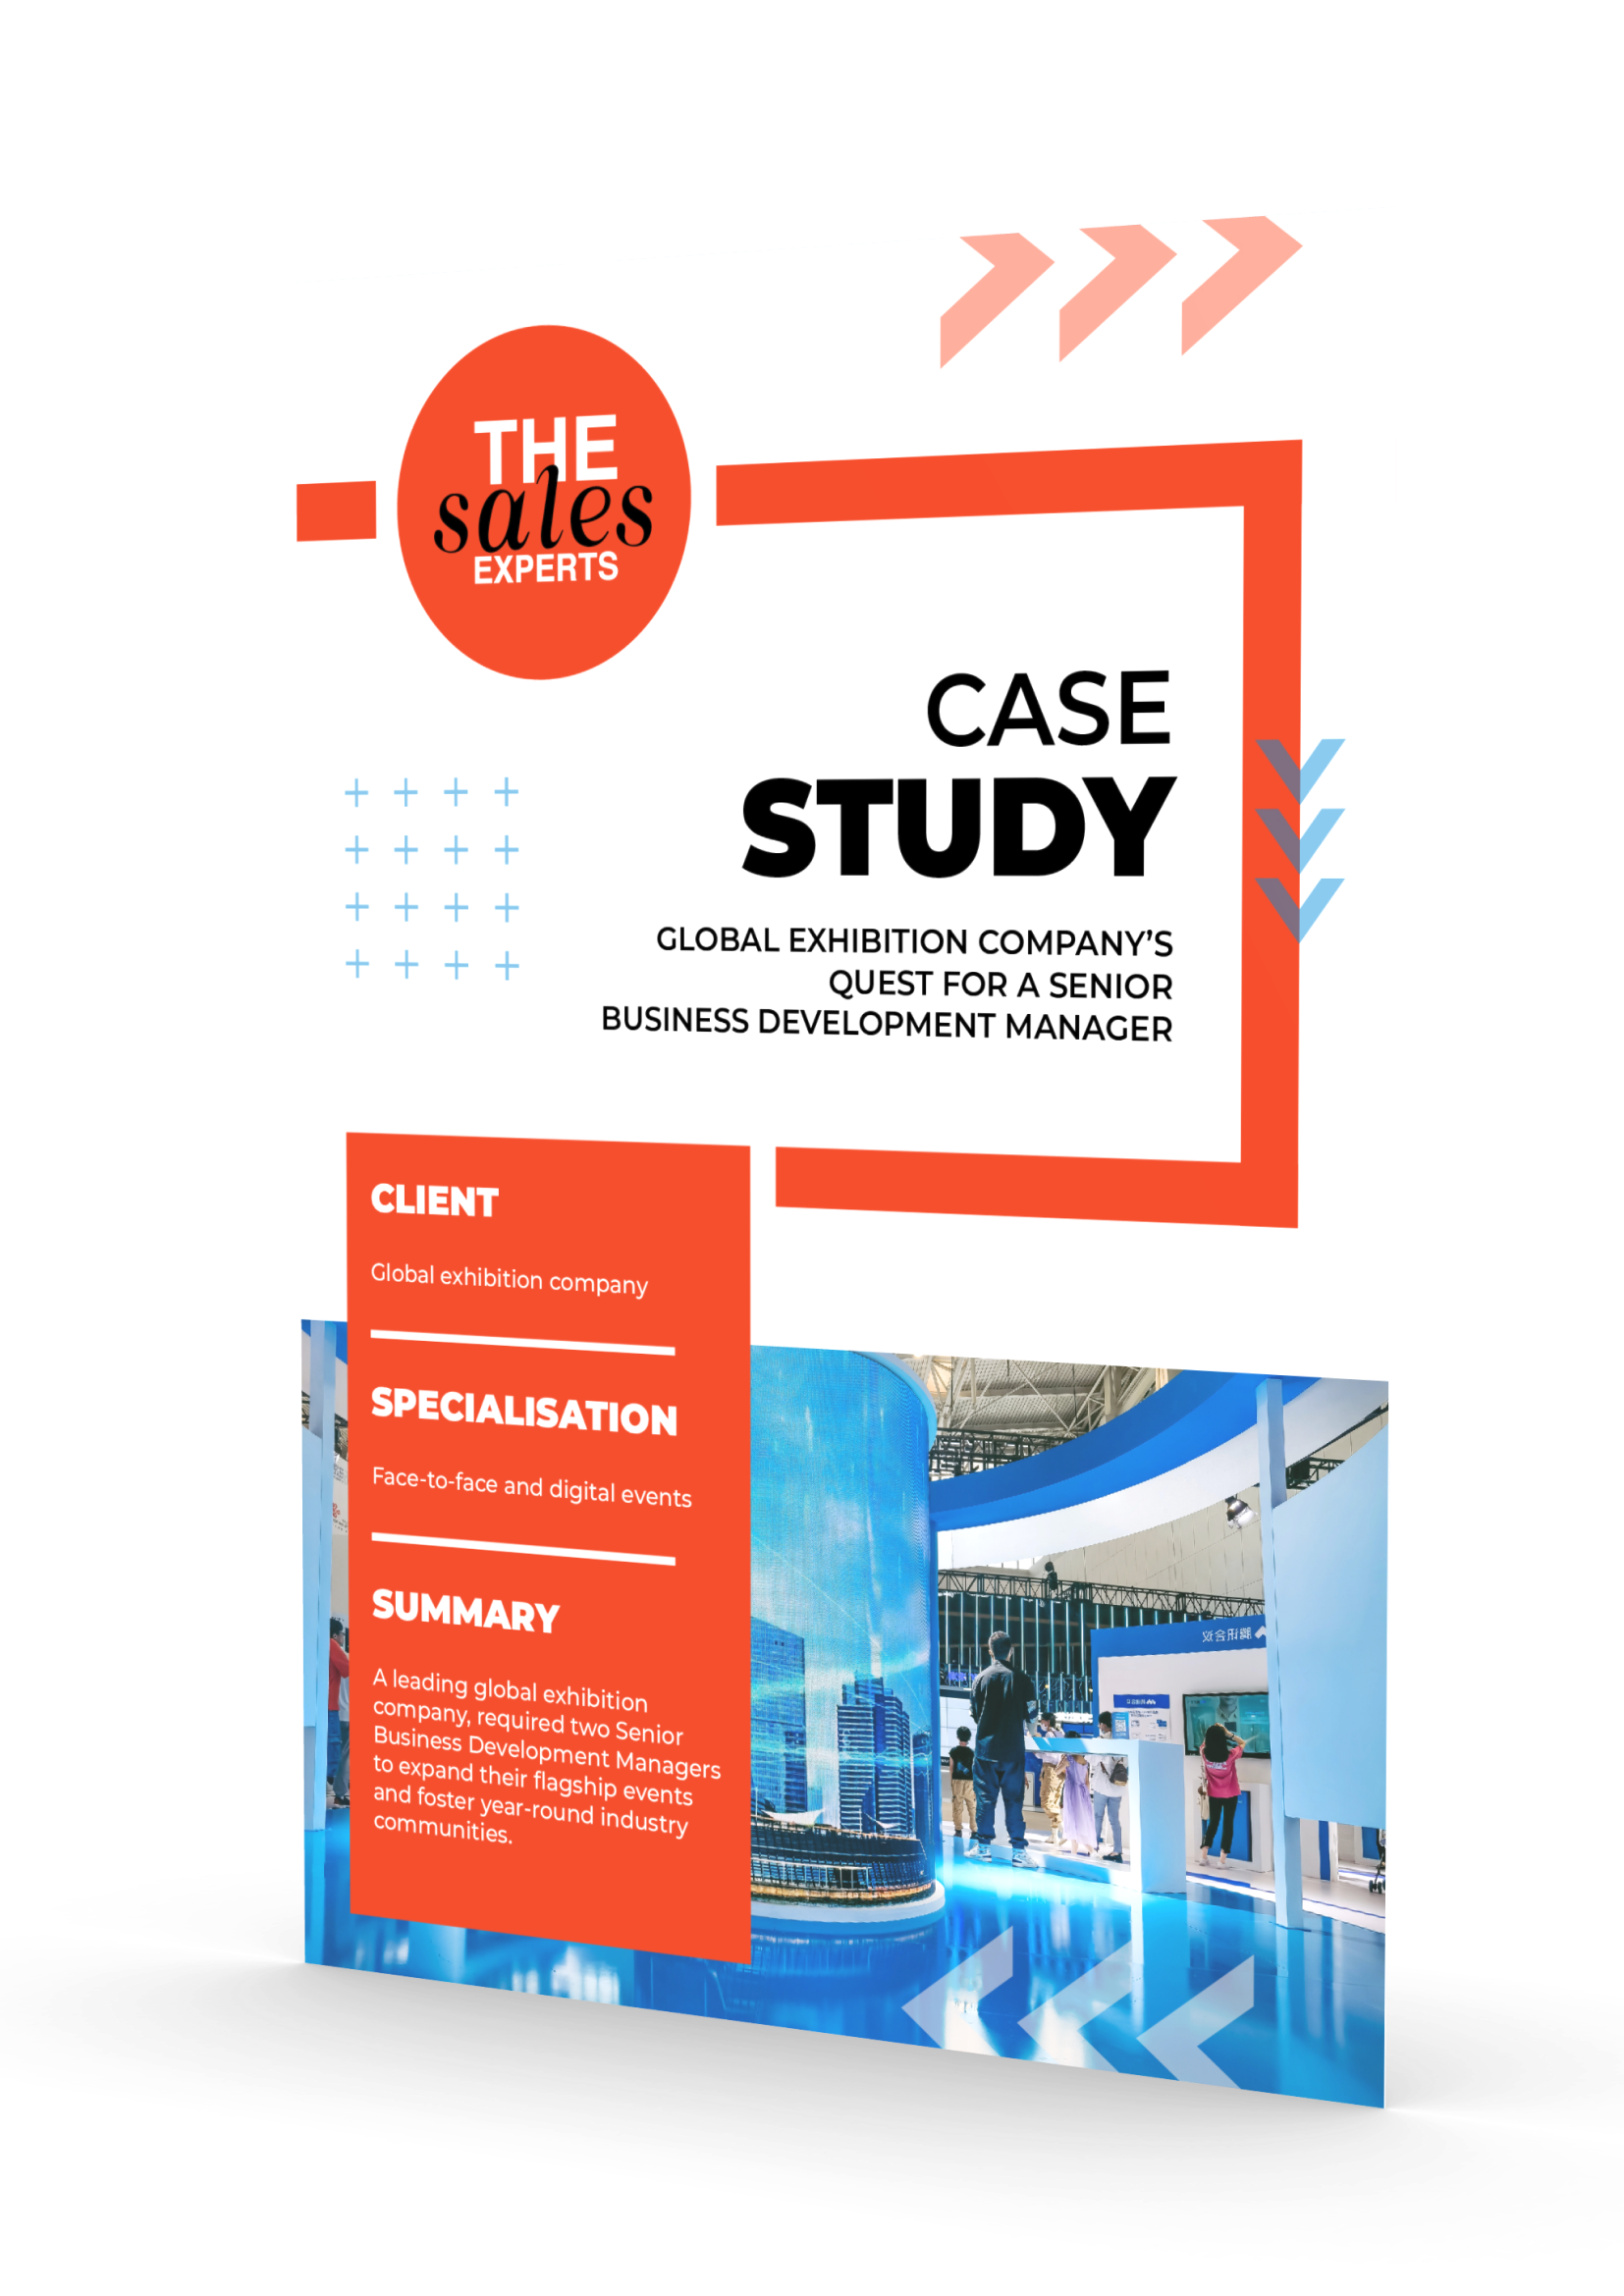 The Sales Experts Case Study - Exhibition Company